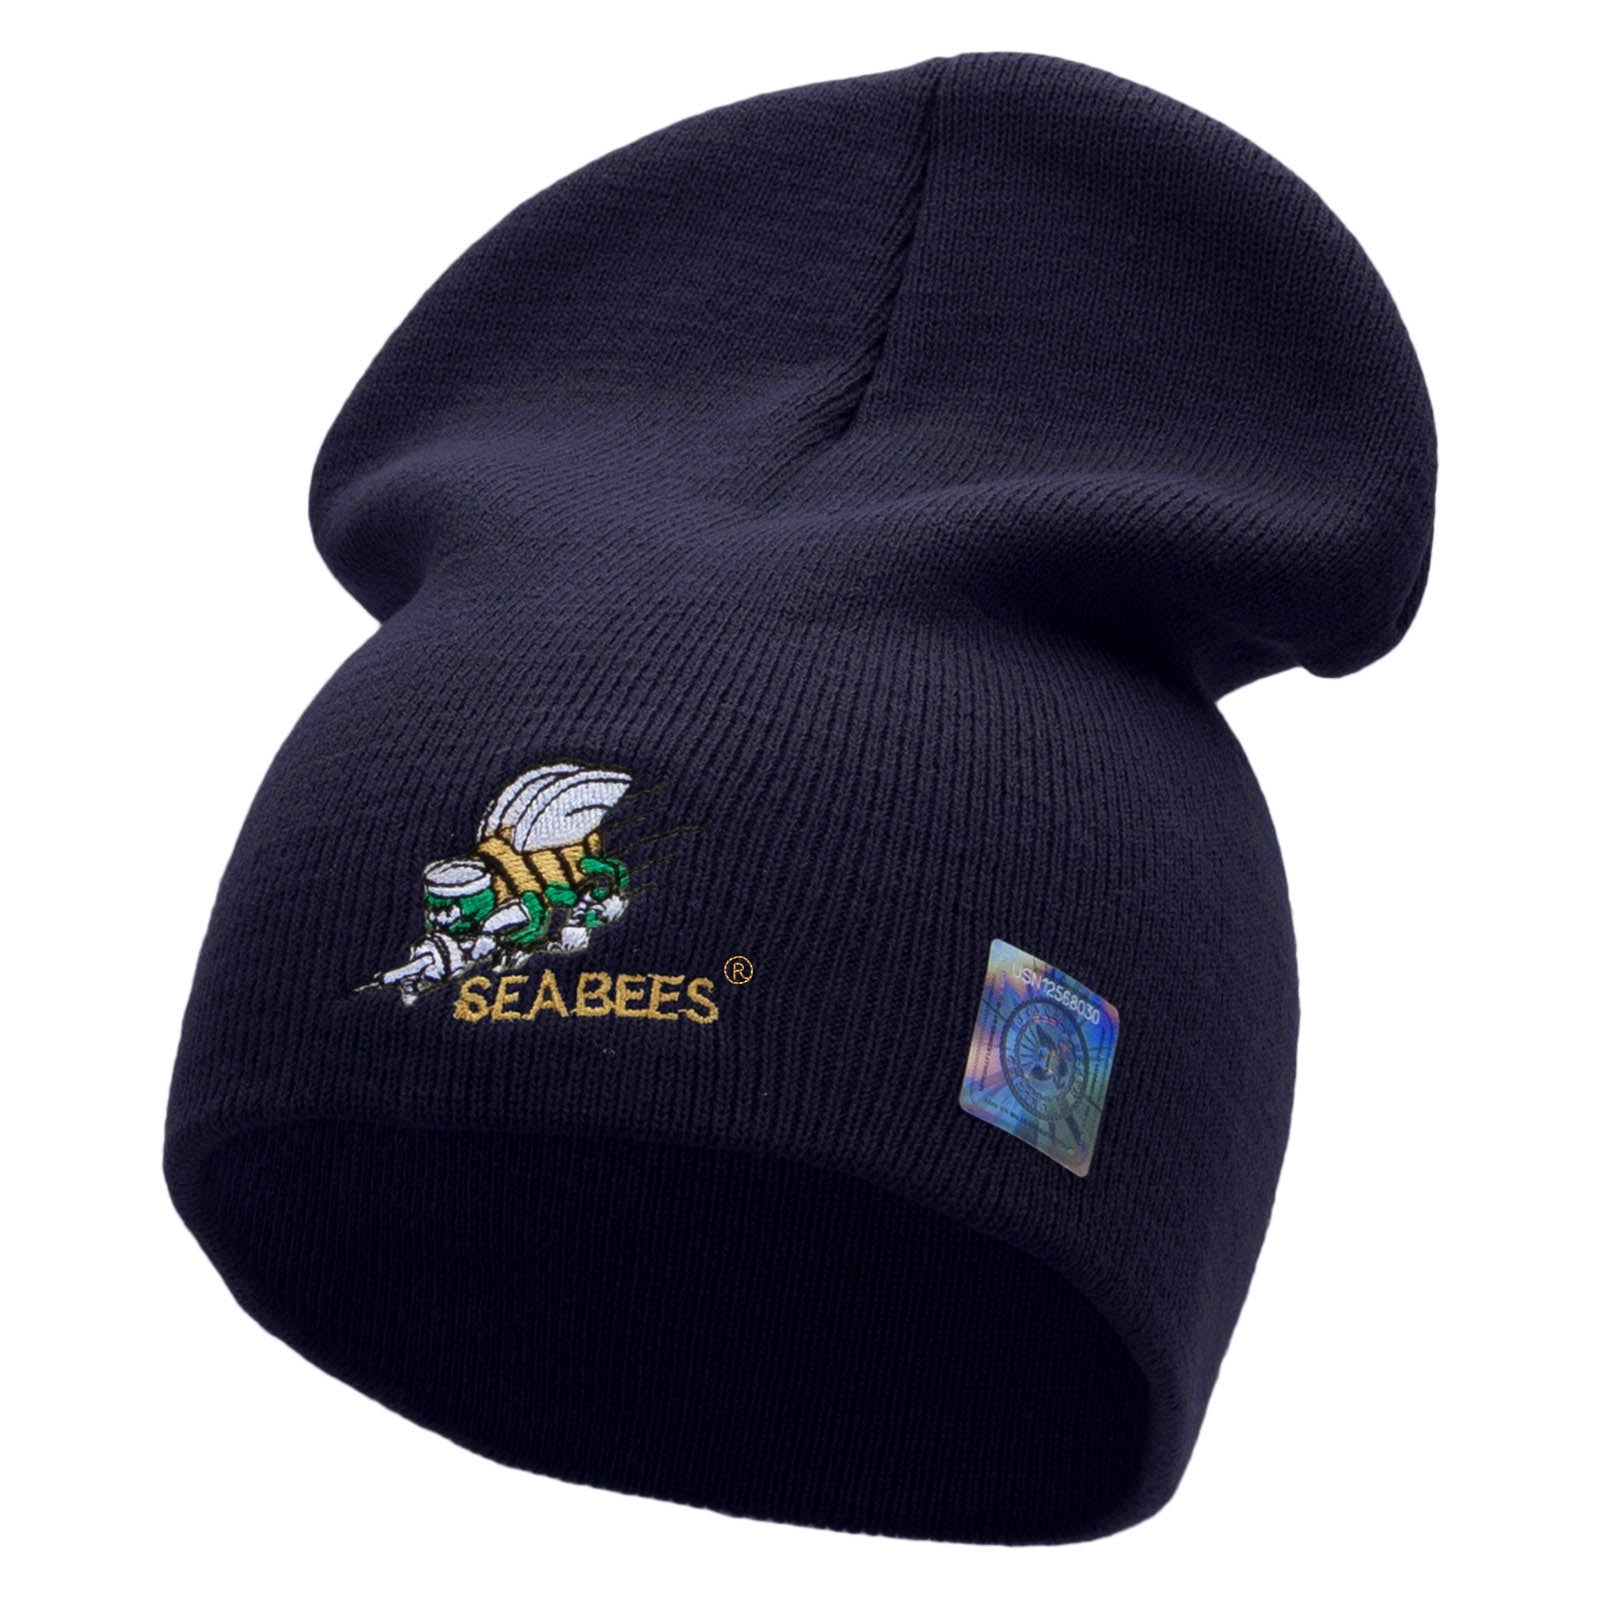 Licensed Navy Seabees Embroidered Short Beanie Made in USA - Navy OSFM